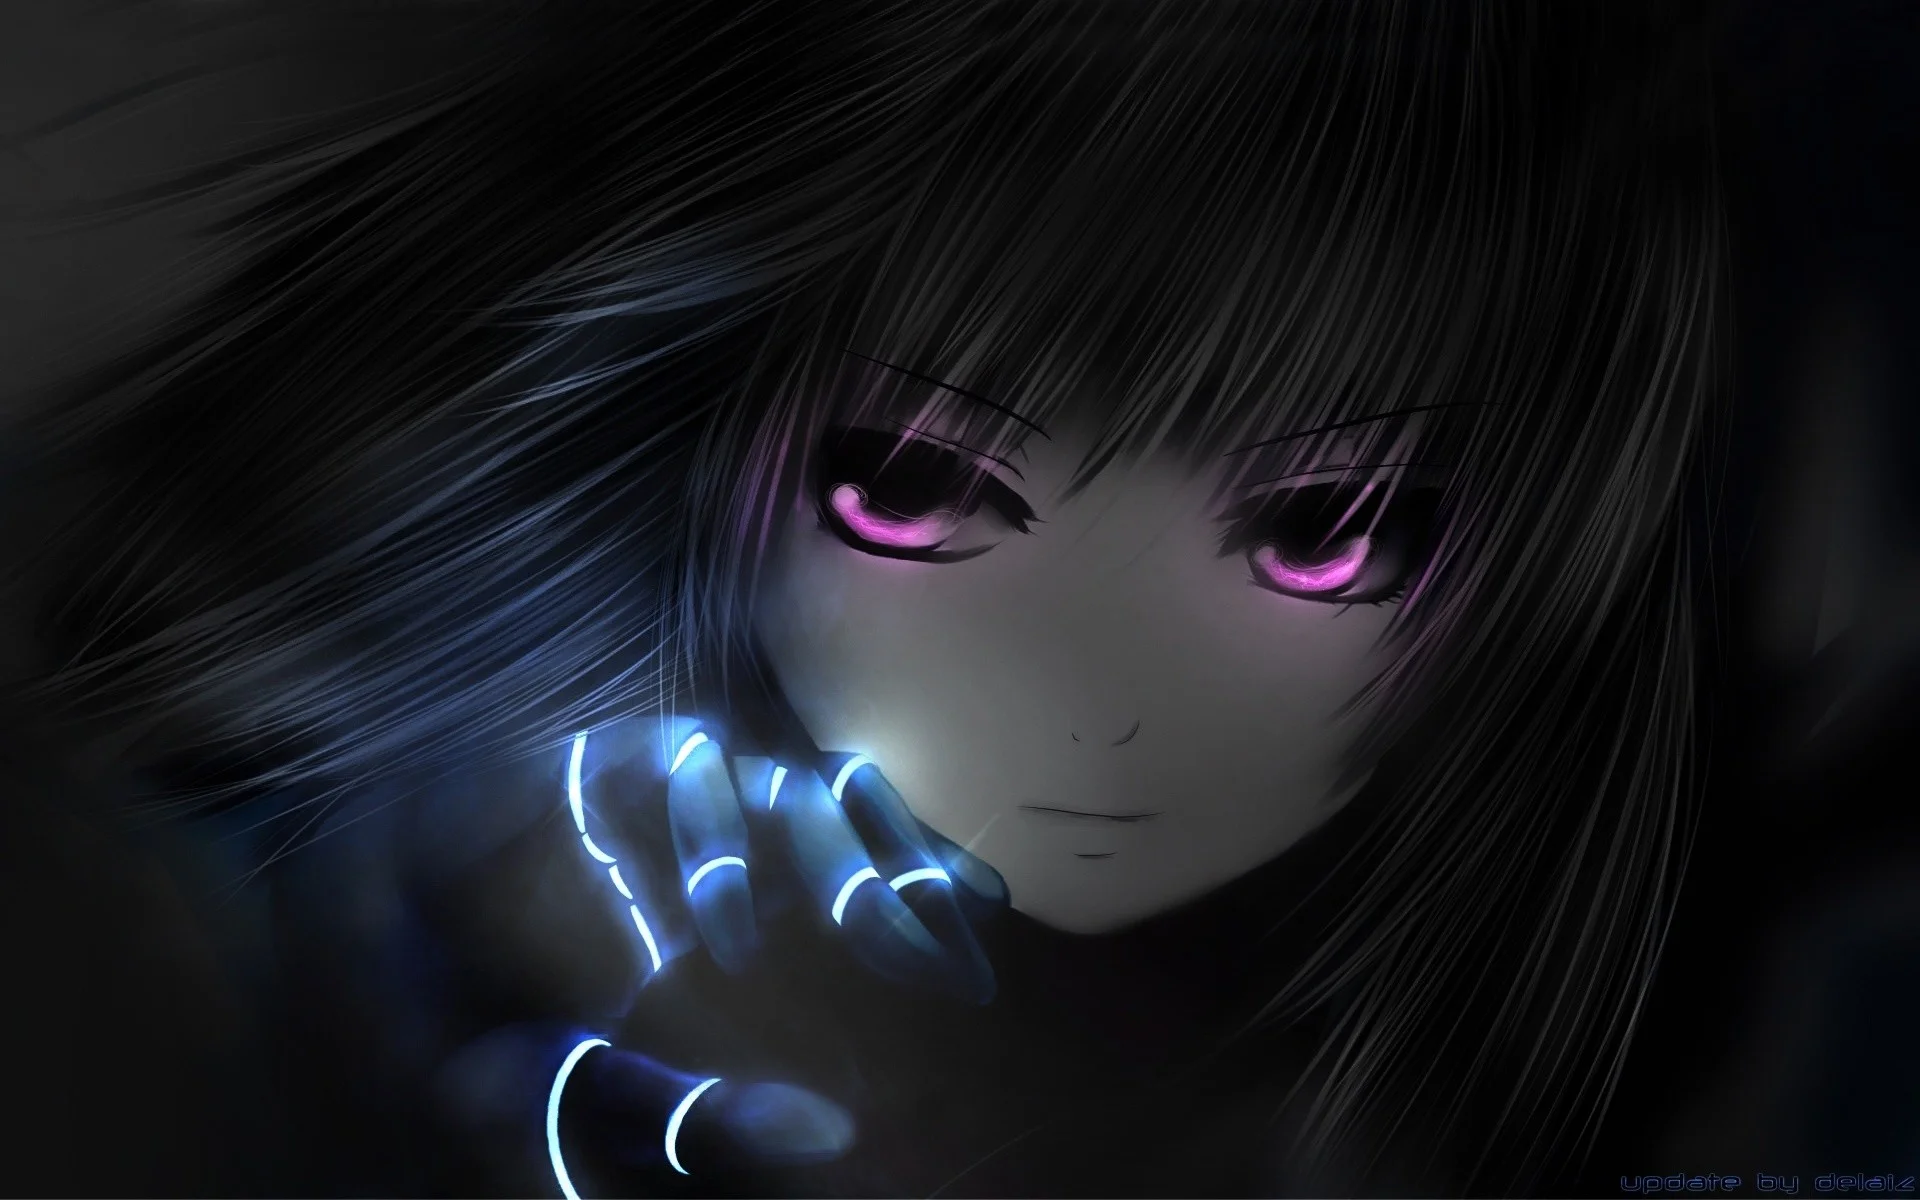 Download and View Full Size Photo. This Dark Anime Girl